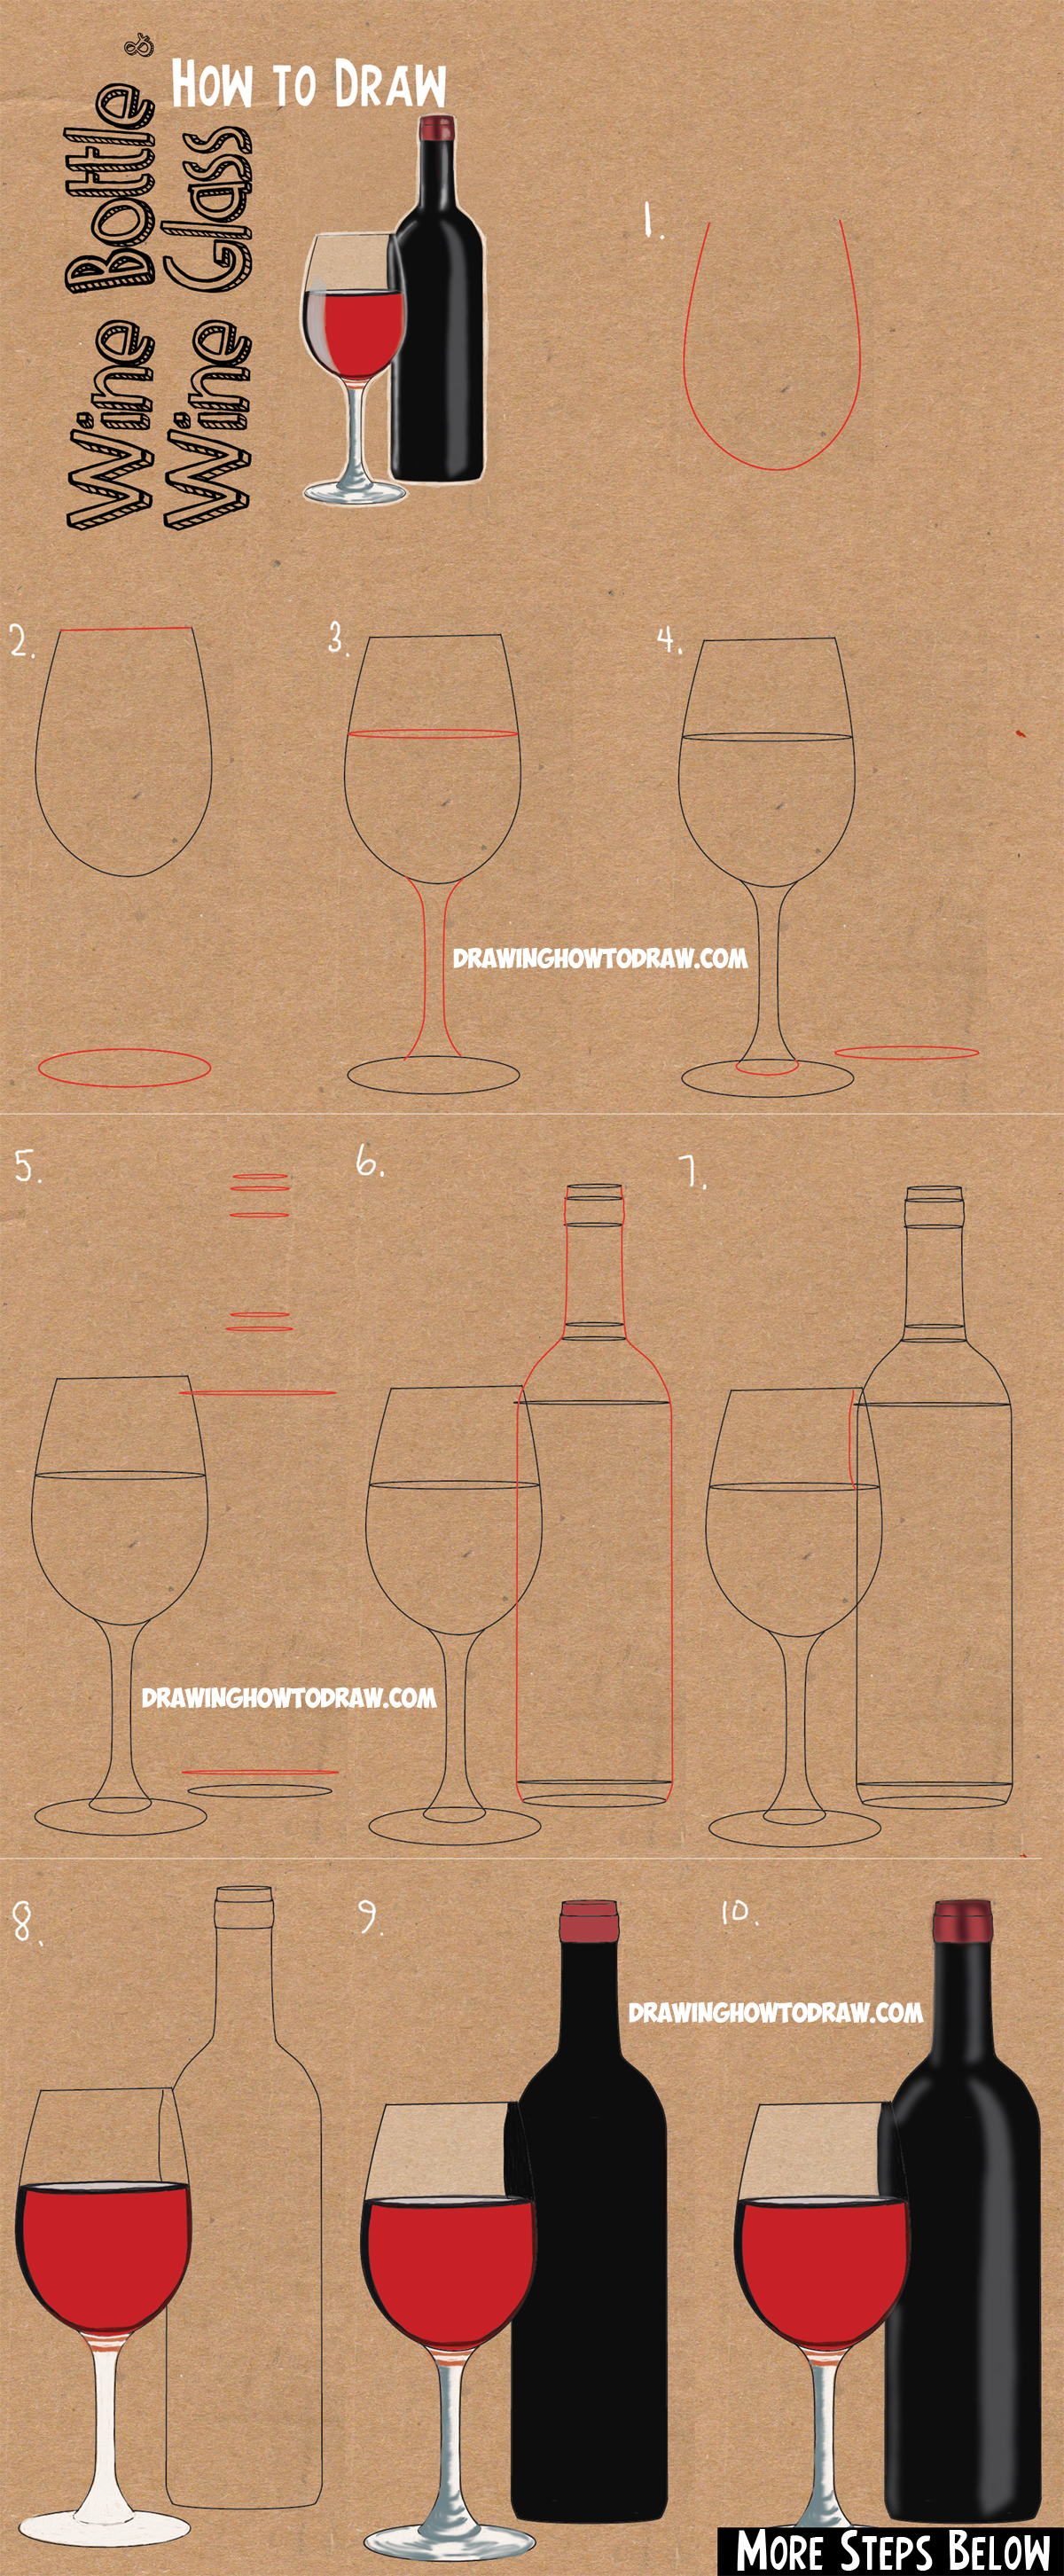 https://www.drawinghowtodraw.com/stepbystepdrawinglessons/wp-content/uploads/2016/02/howtodraw-stepby-step-tutorial-wine-bottle-and-glass.jpg